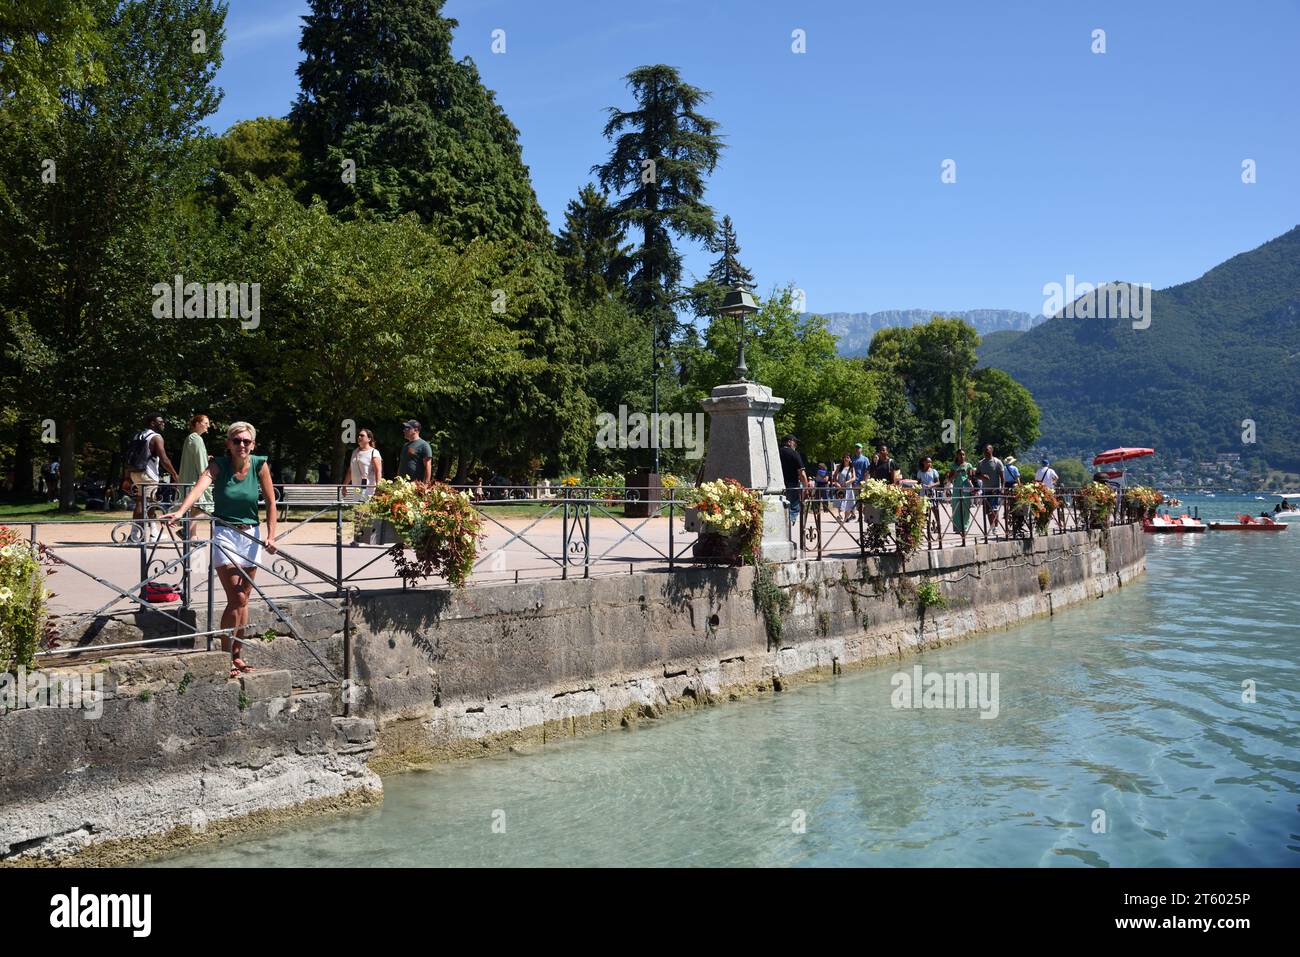 Tourists Walking Along the Quai Napoléon in the Jardins de l'Europe on the Lakeside or Waterfront of Annecy Lake Annecy Haute-Savoie France Stock Photo